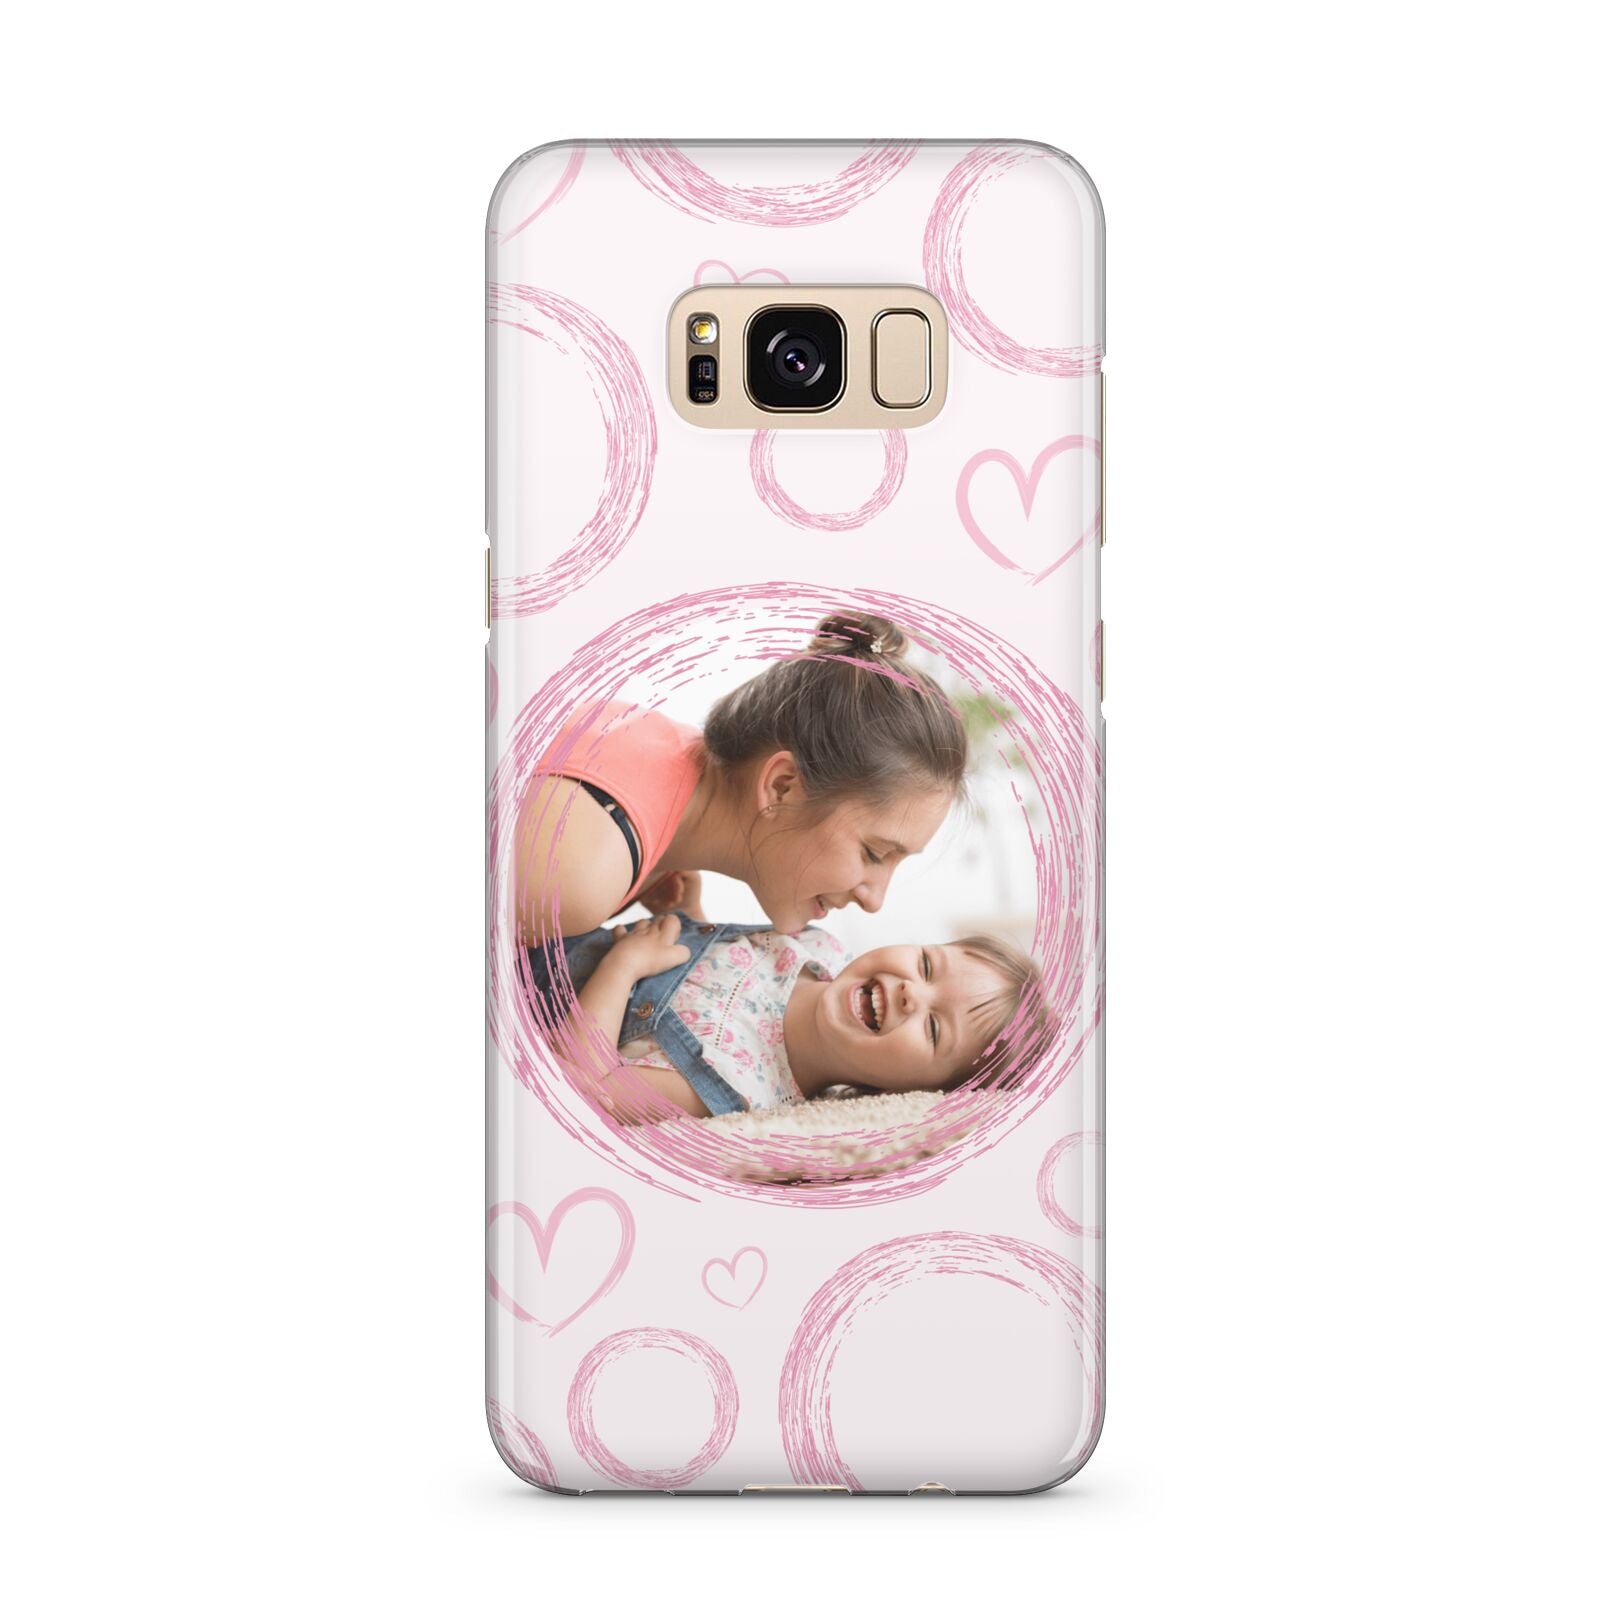 Pink Love Hearts Photo Personalised Samsung Galaxy S8 Plus Case